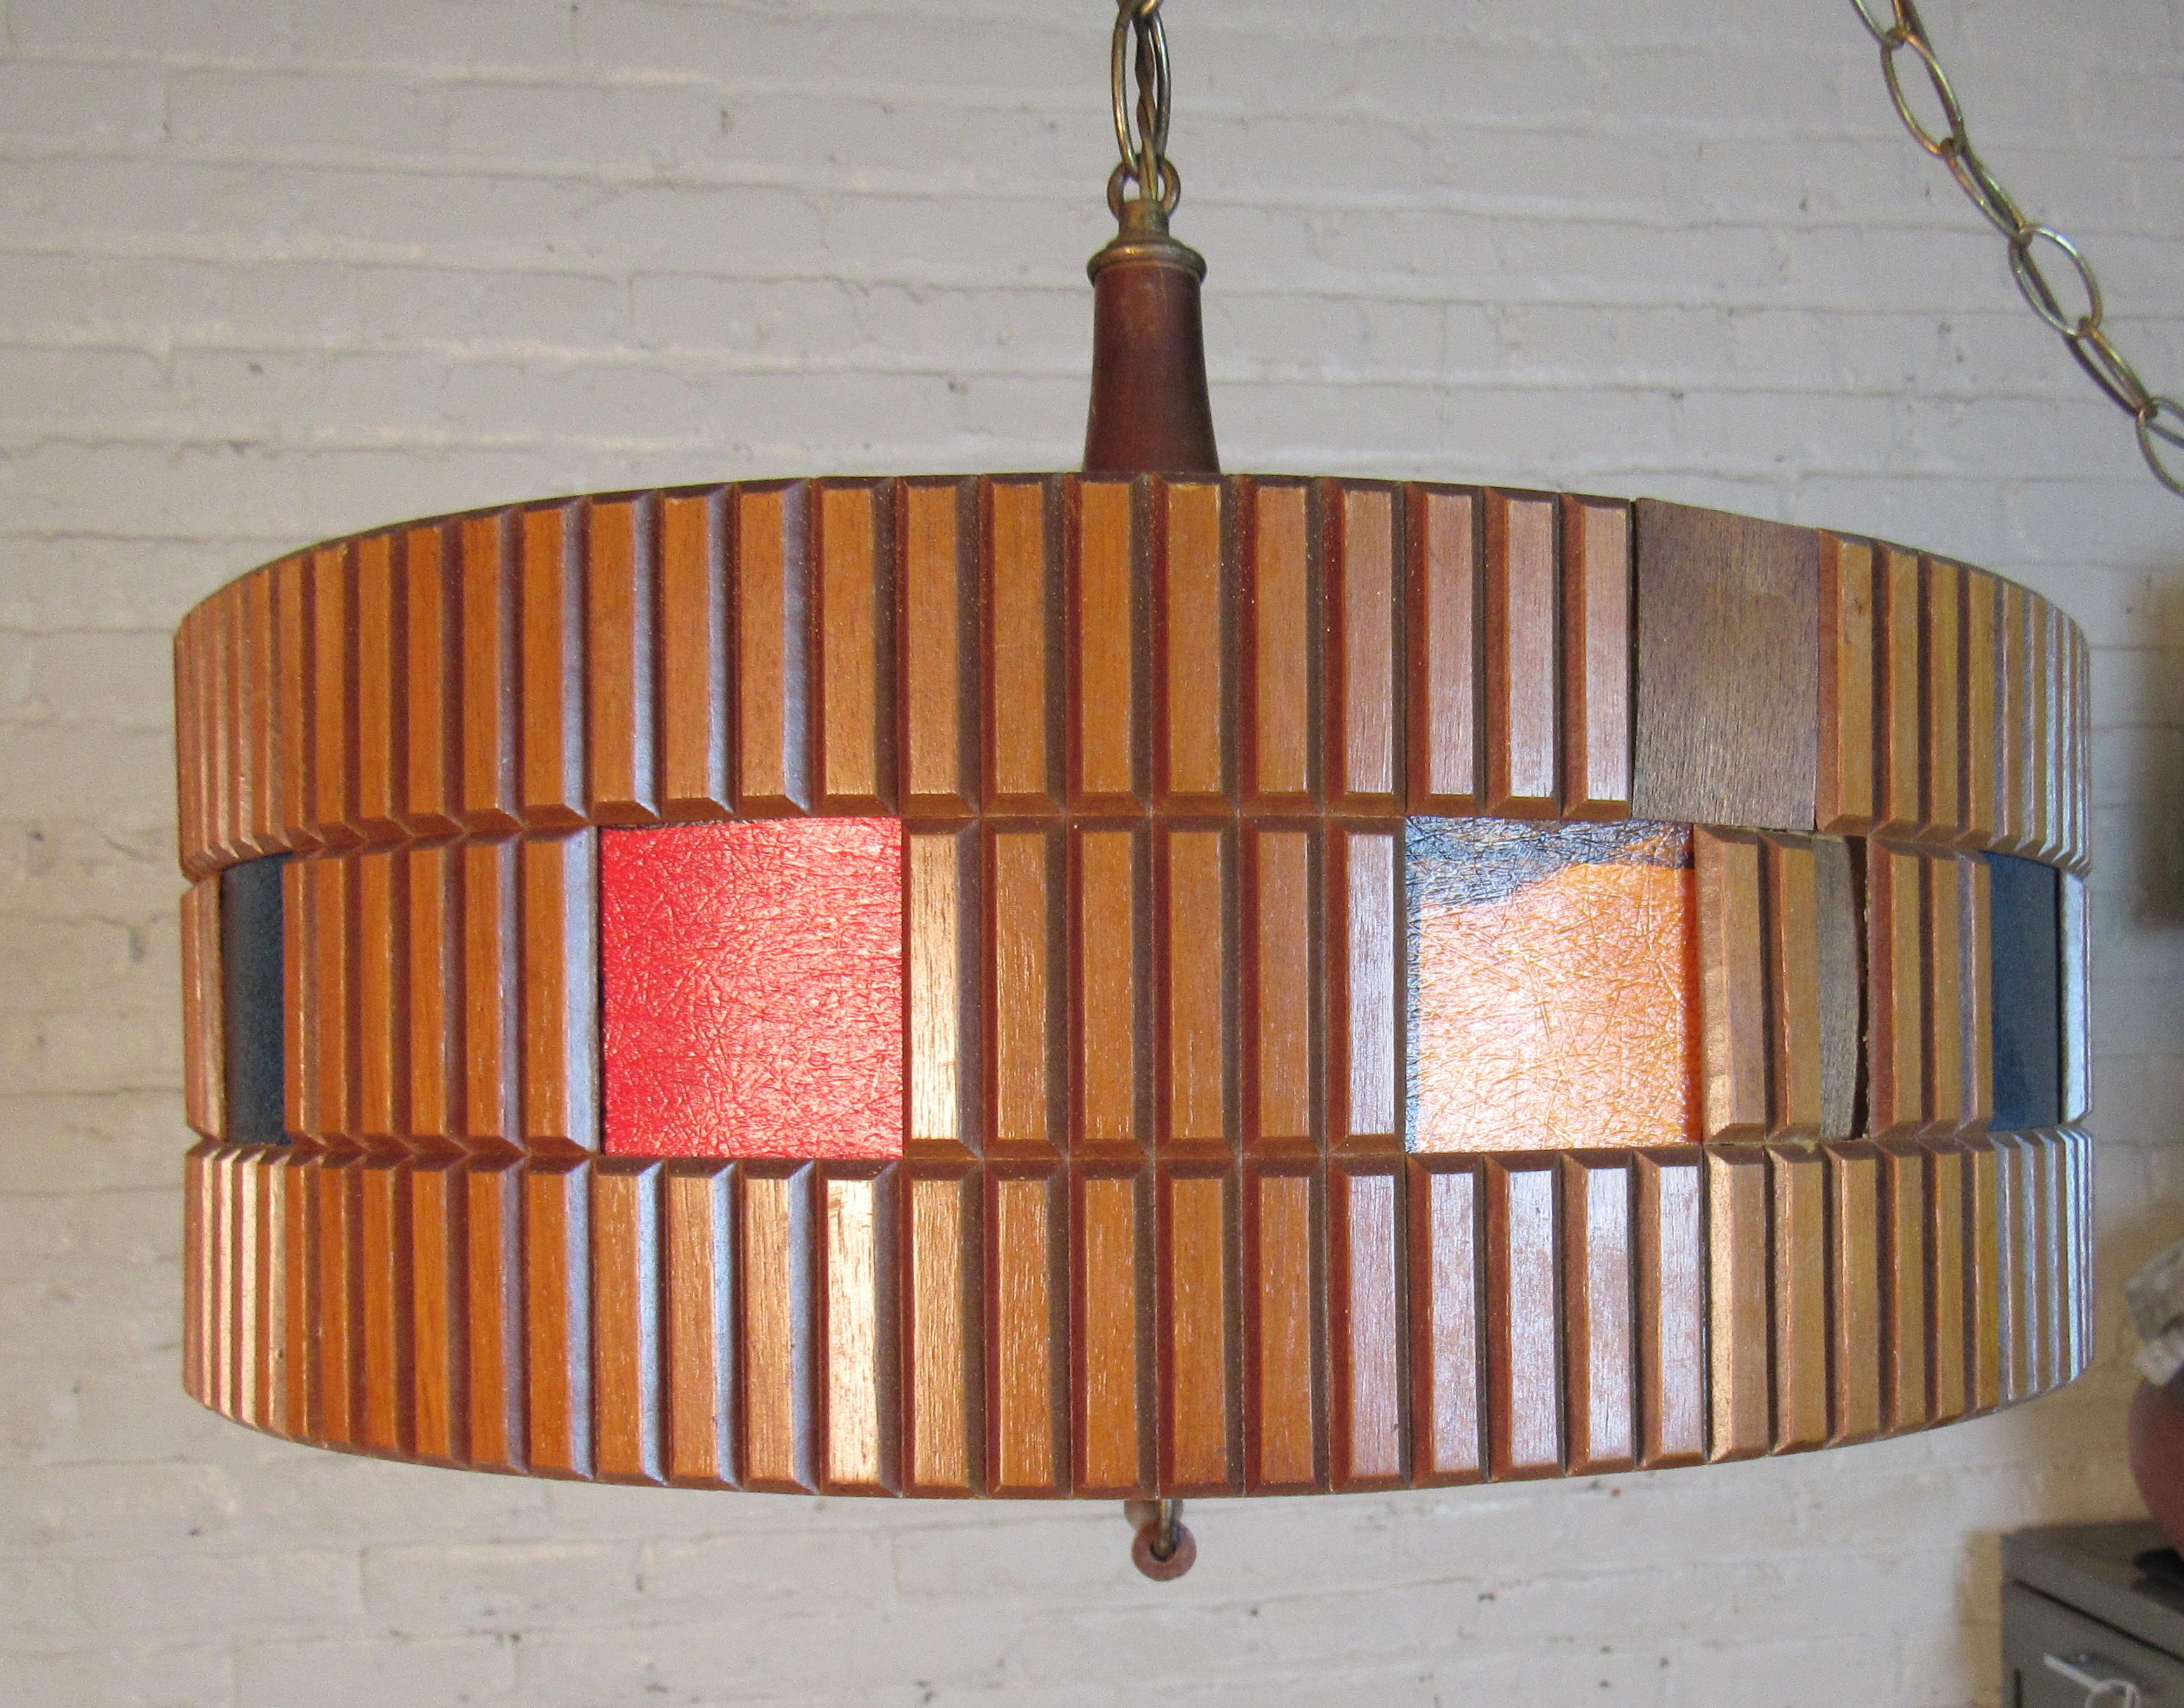 Mid-Century Modern sleek wooden chandelier featured in a circular shape. The outer frame is made up of colored wood and wood chips.

Please confirm item location NY or NJ with dealer.